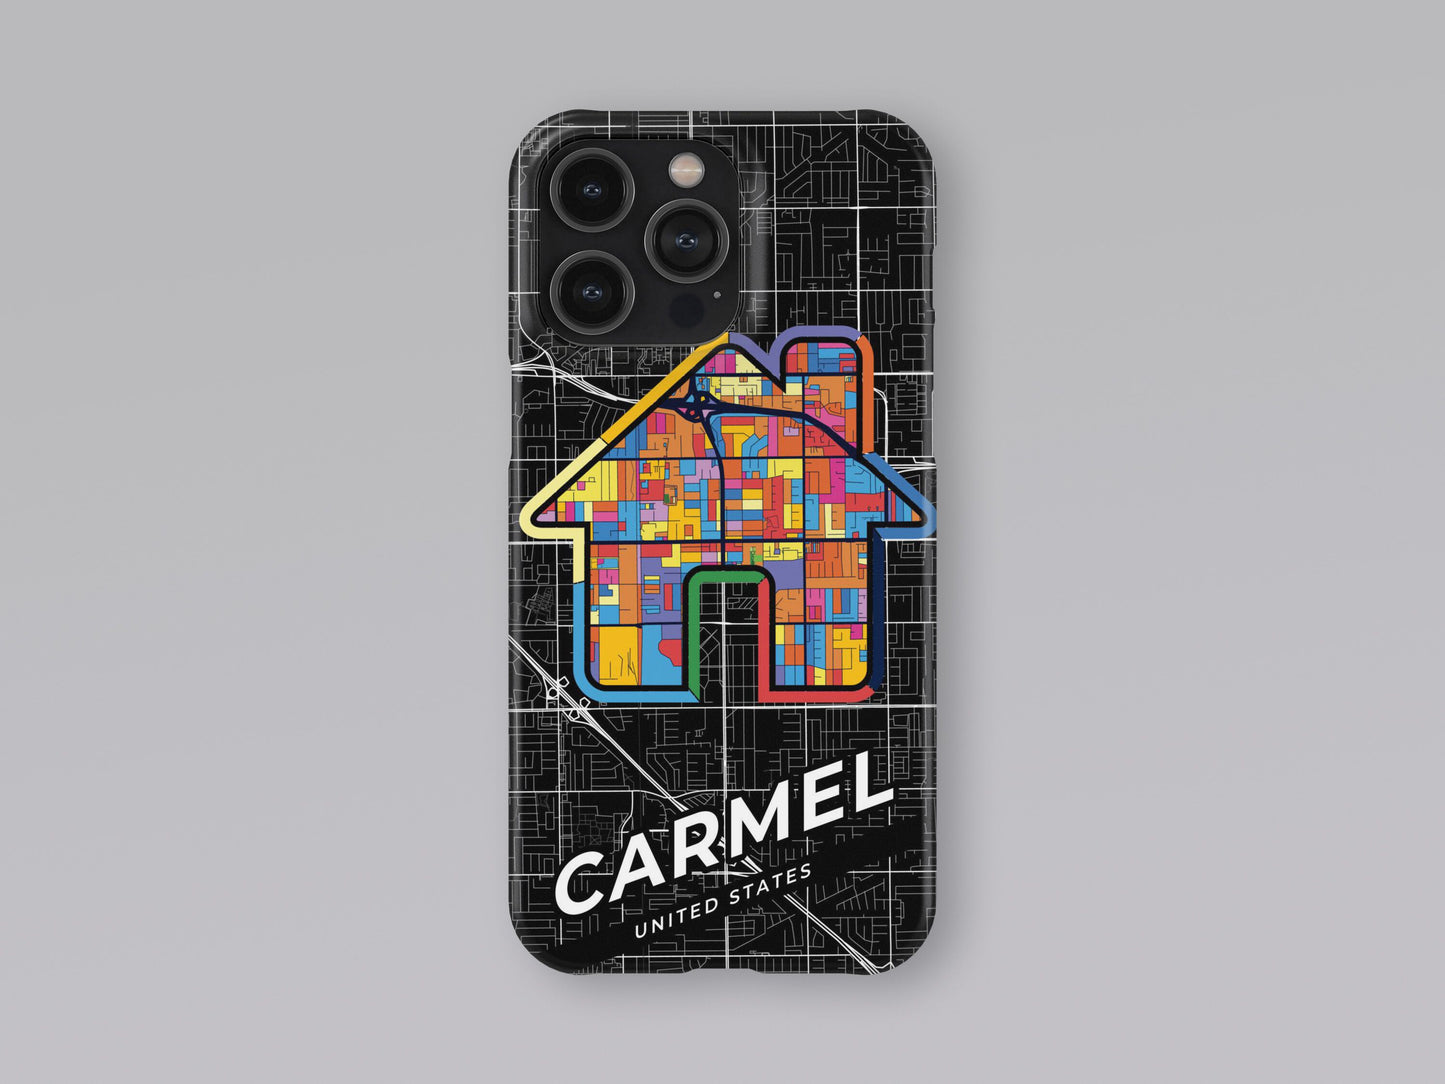 Carmel Indiana slim phone case with colorful icon. Birthday, wedding or housewarming gift. Couple match cases. 3